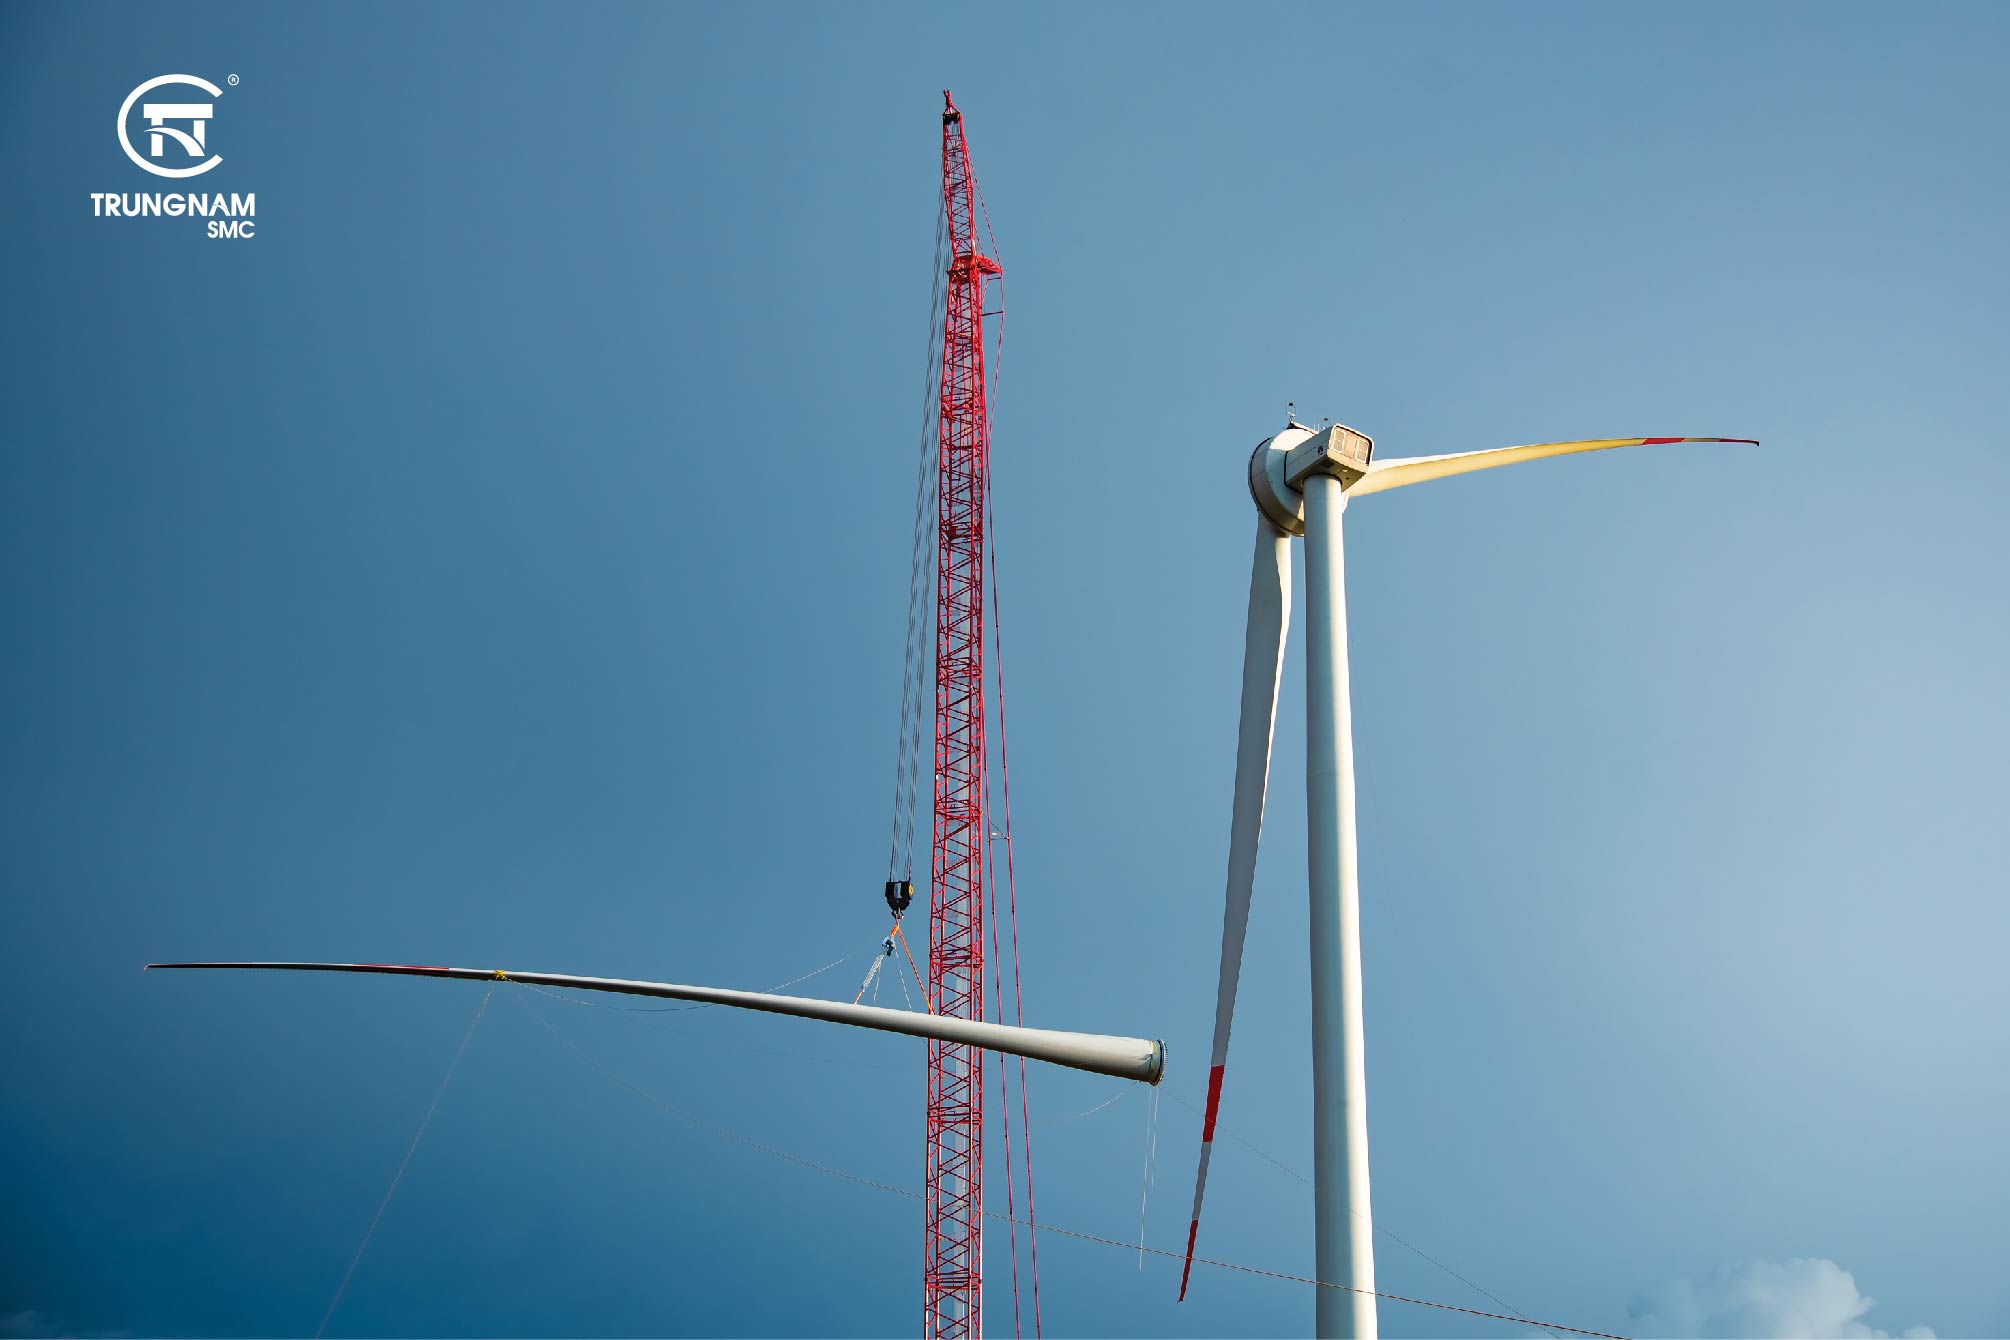 Replacing and repairing wind turbine blades services - O&M turbines service